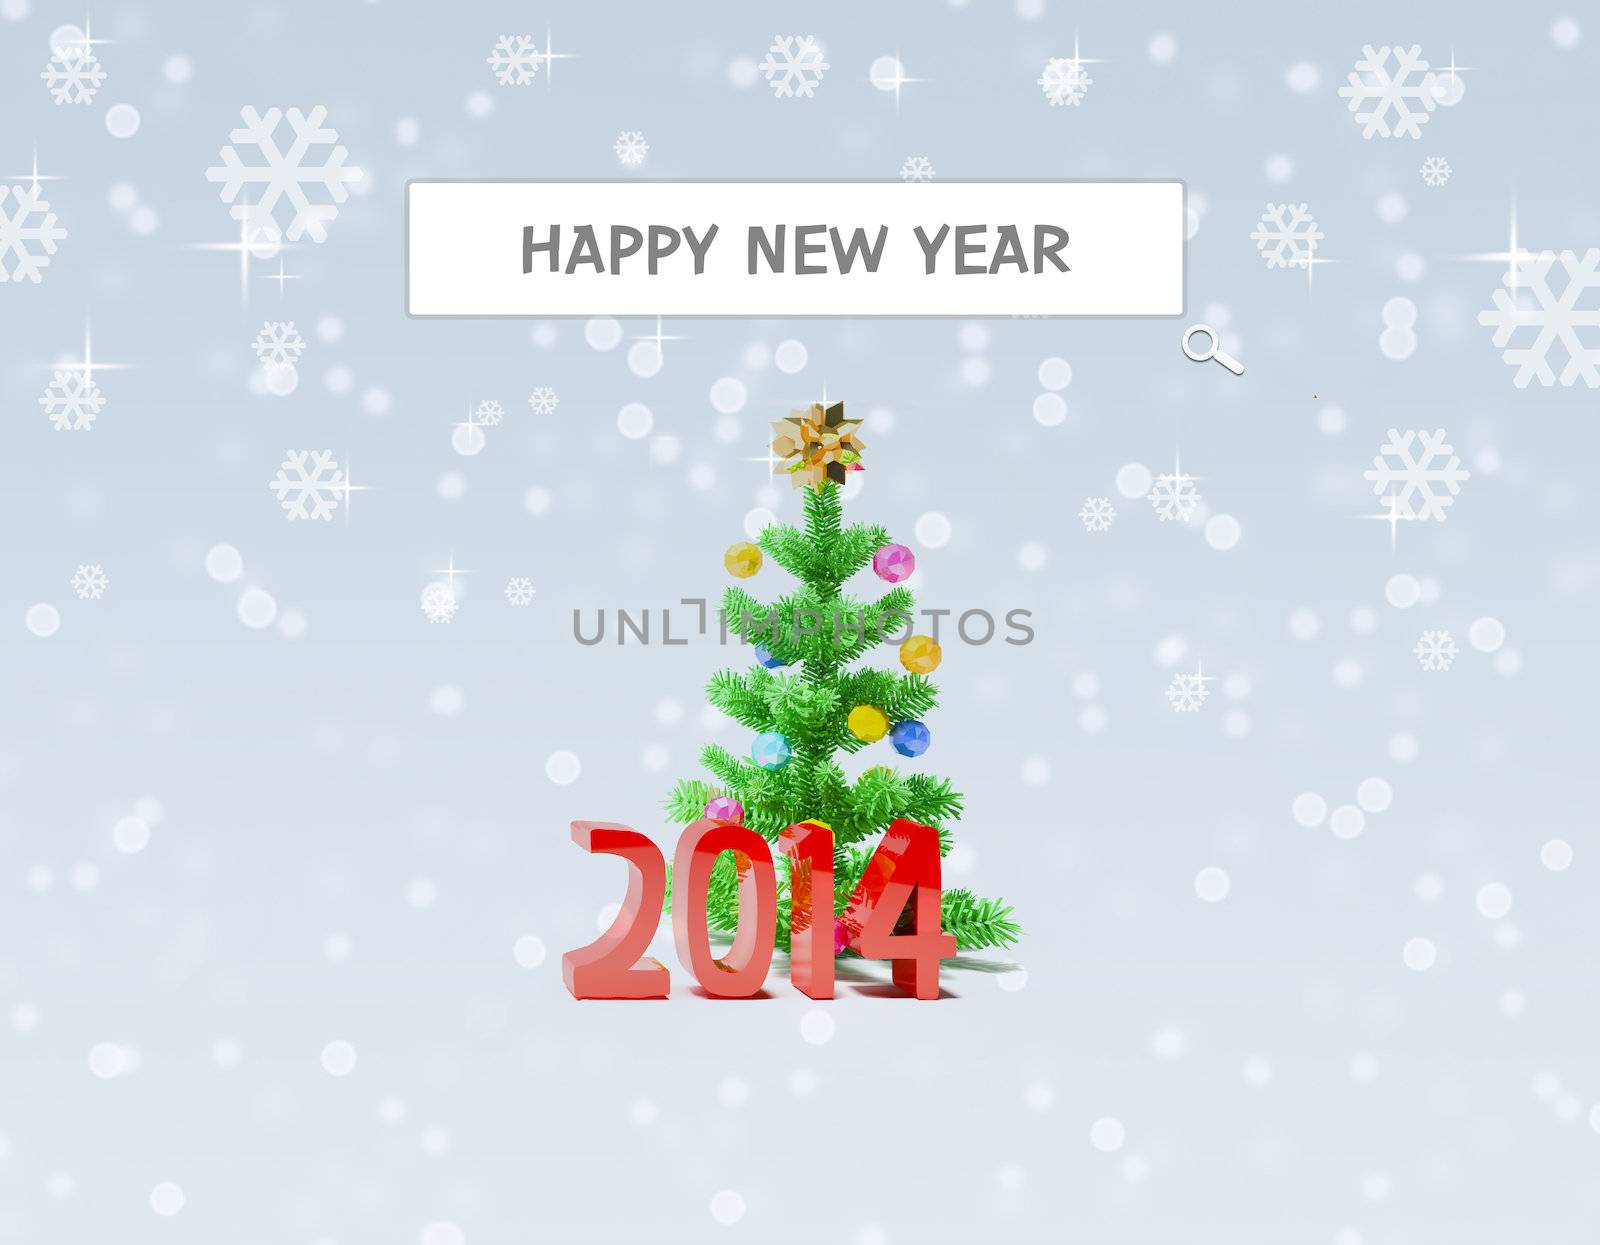 Greeting cards for happy new year 2014